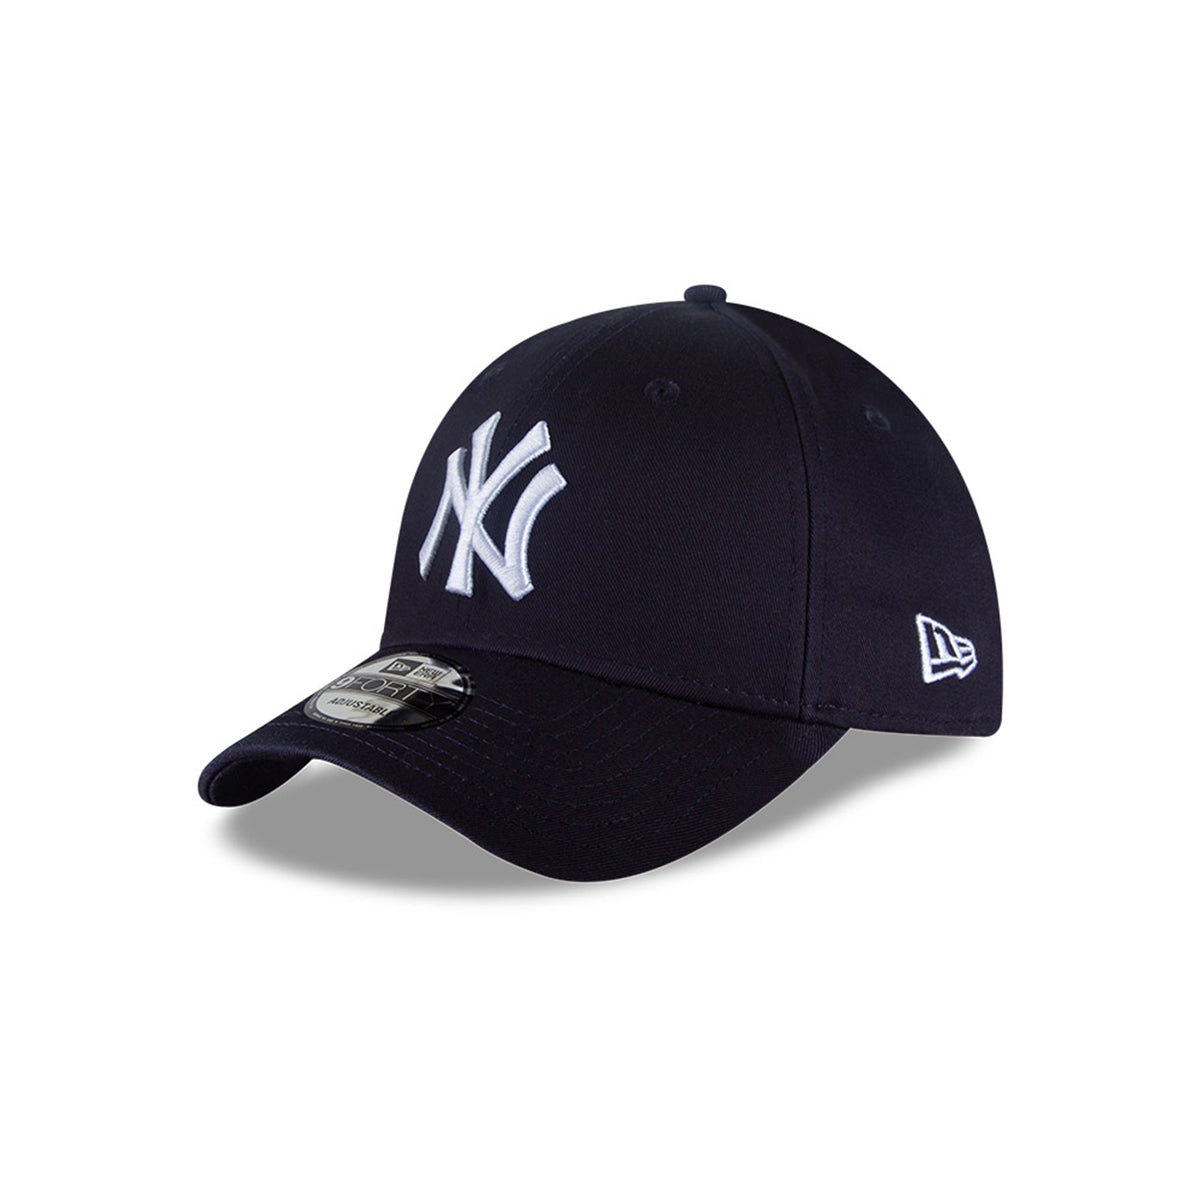 MLB New York Yankees League Essential 9Forty Cap Navy/White